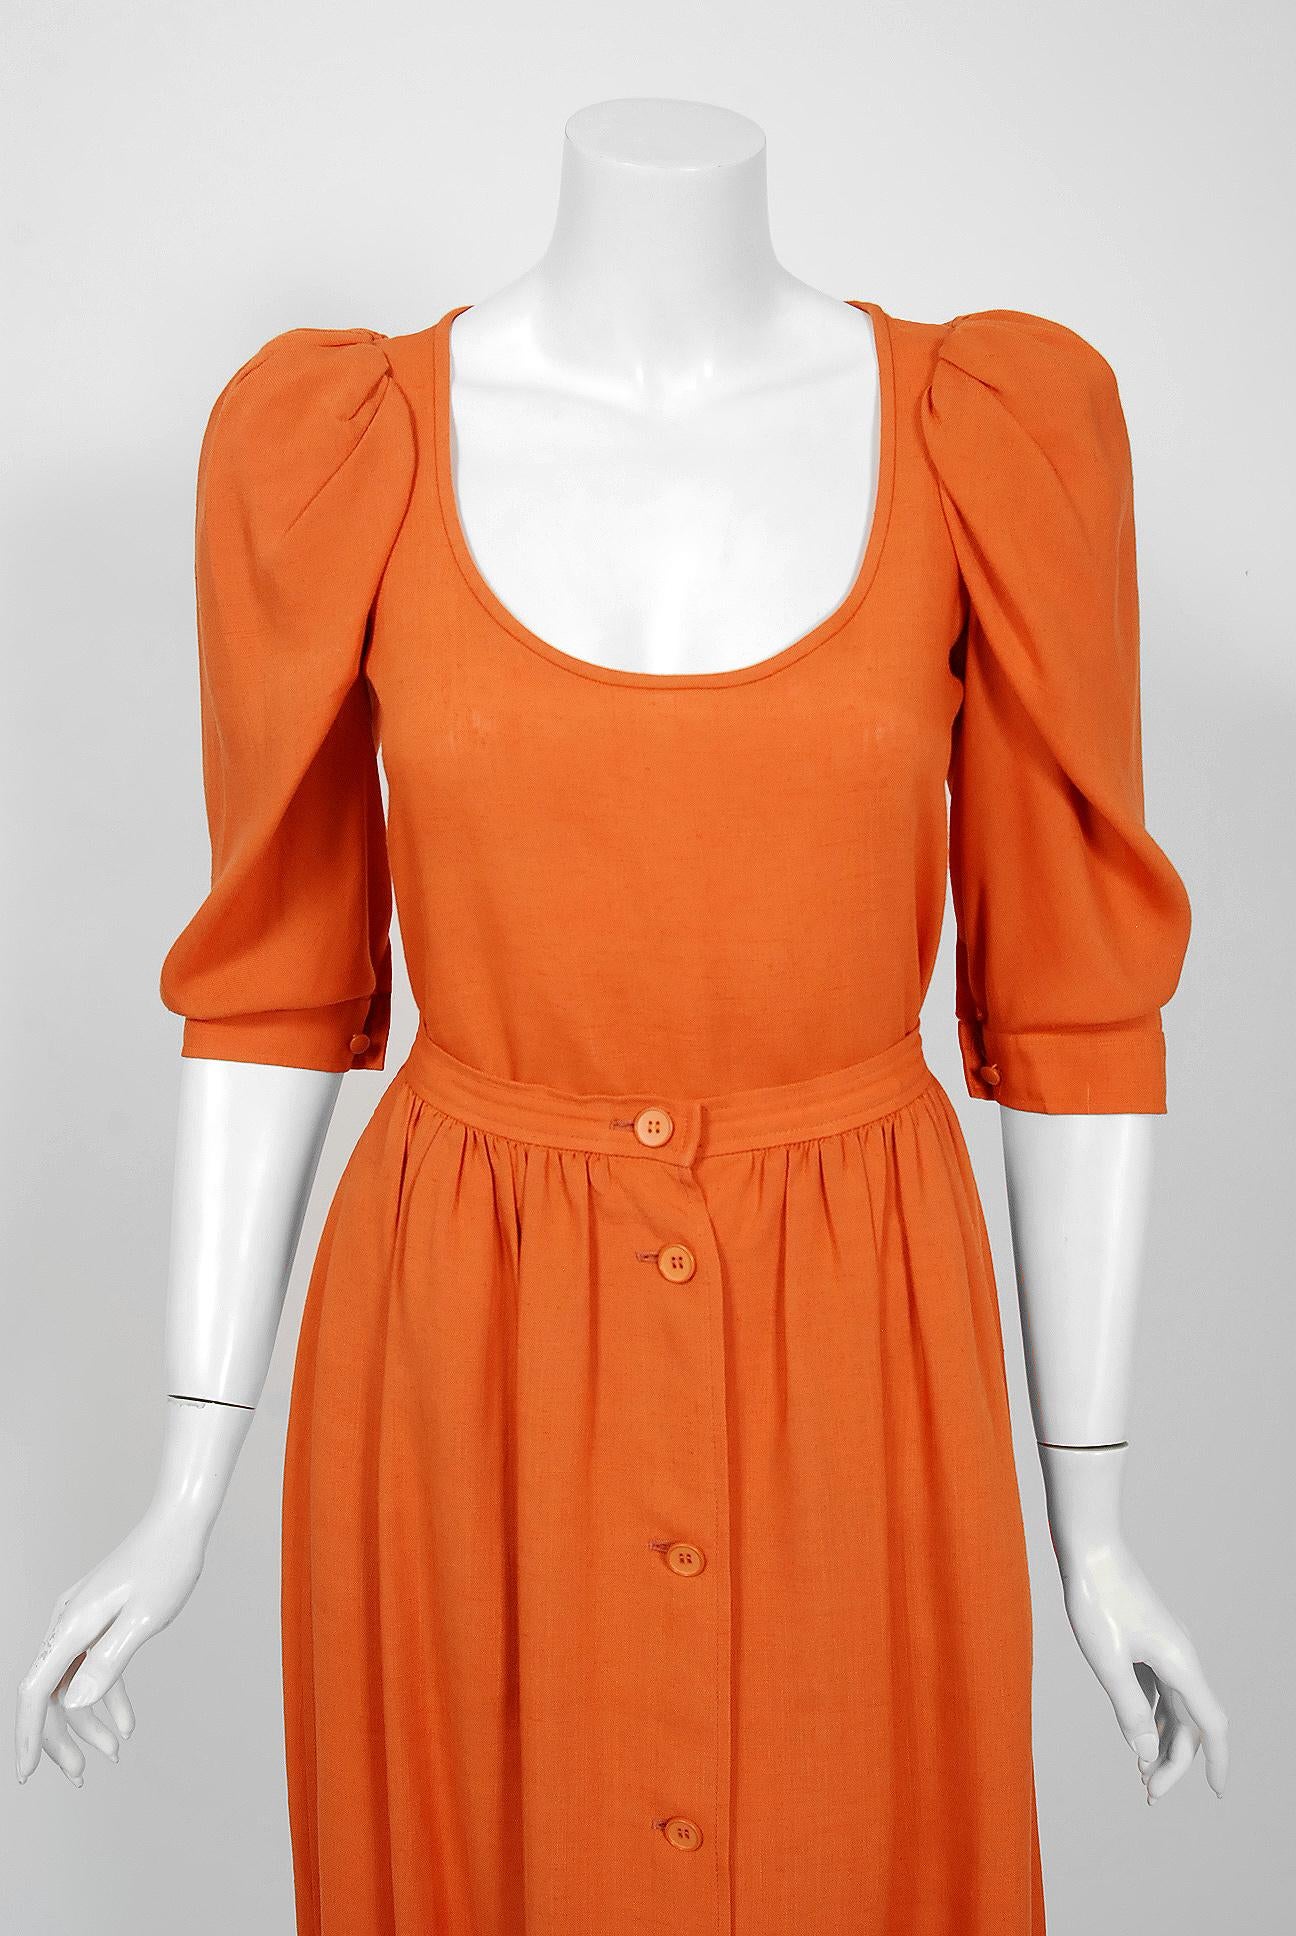 Gorgeous Yves Saint Laurent orange cotton-linen ensemble from the infamous 1978 Rive Gauche collection. Pieces from this decade are very rare and are true examples of fashion history. I adore the unique construction of the low-scoop sculpted